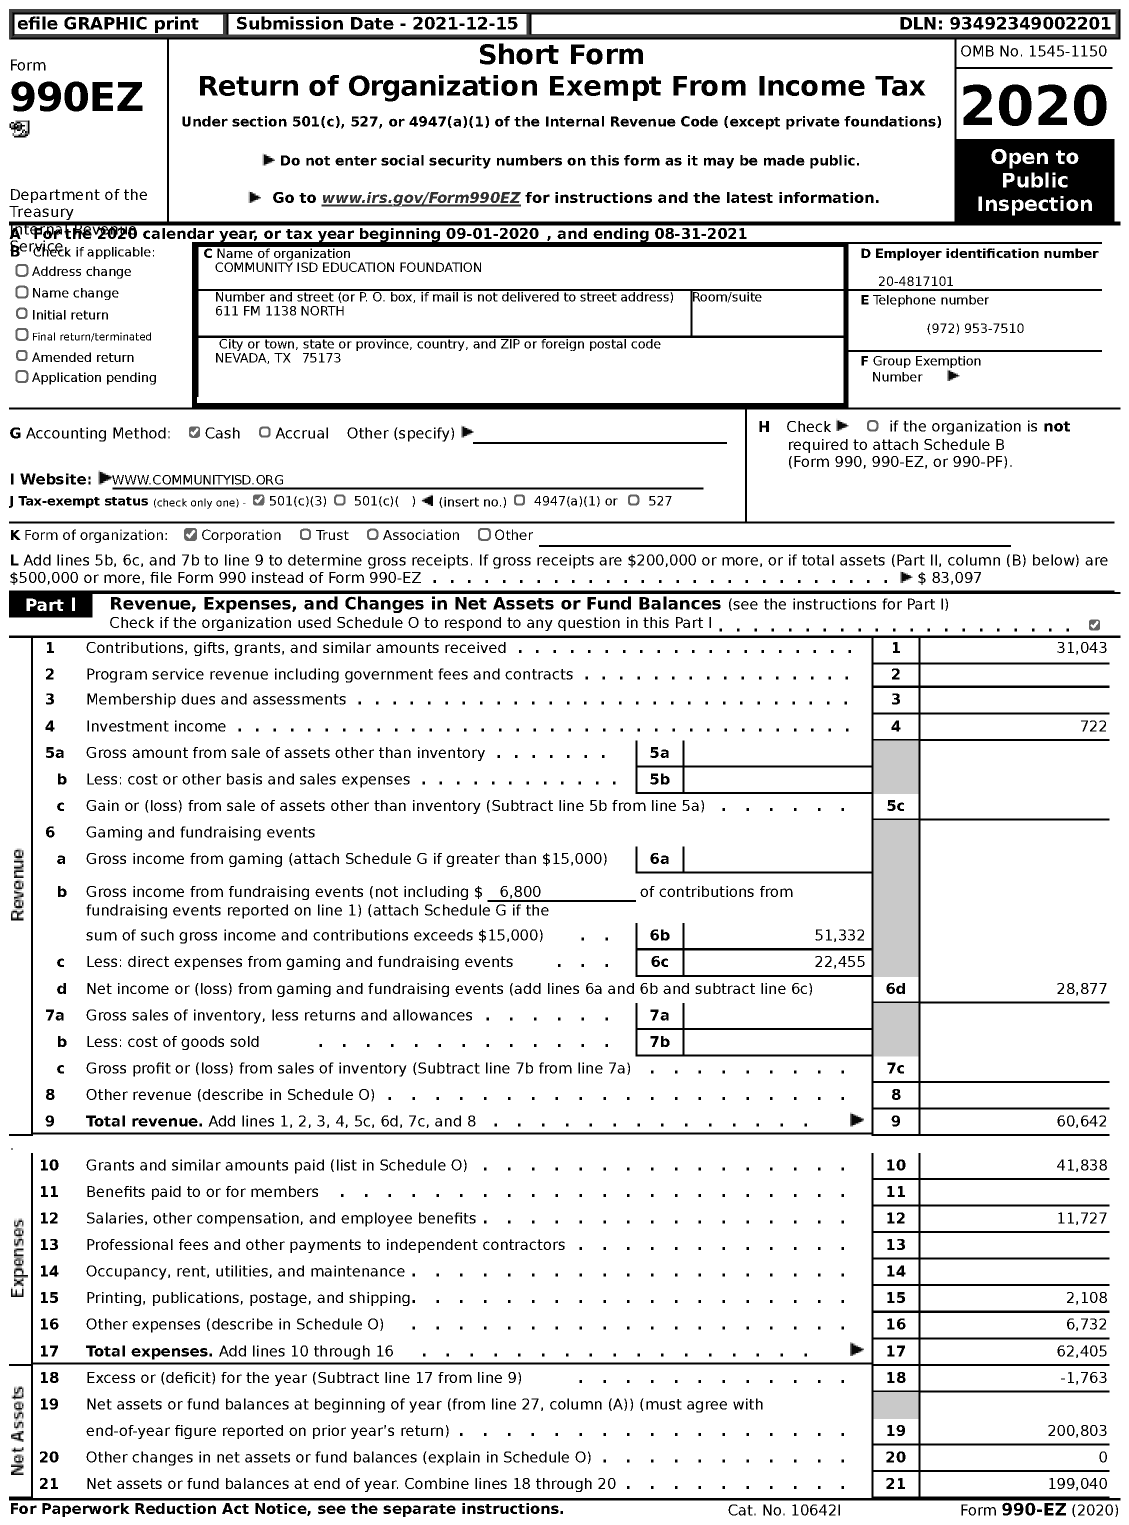 Image of first page of 2020 Form 990EZ for Community Isd Education Foundation